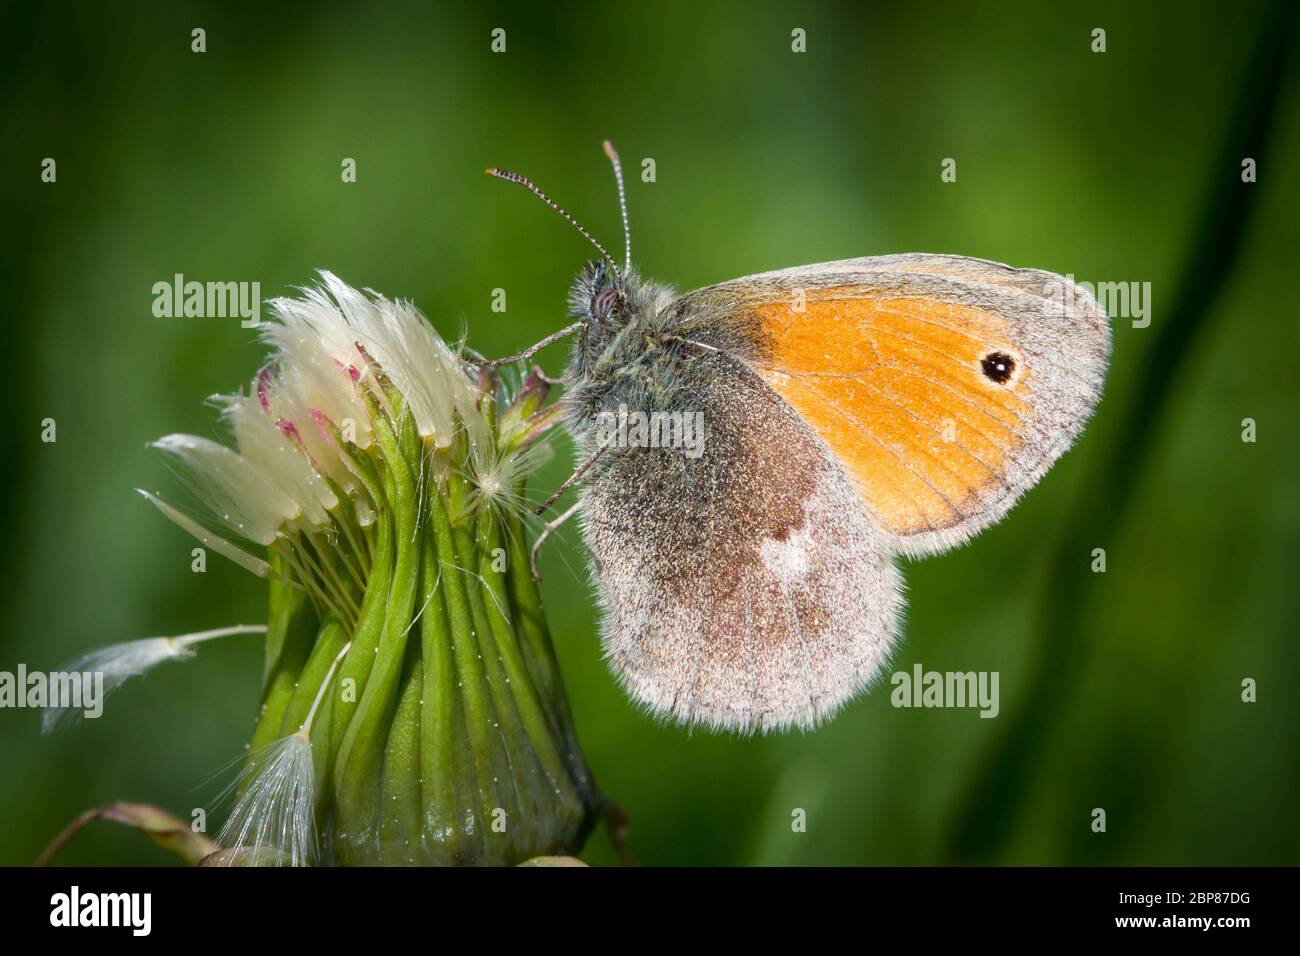 Small heath butterfly (Lepidoptera Coenonympha pamphilus) feeding on a pink flower Stock Photo